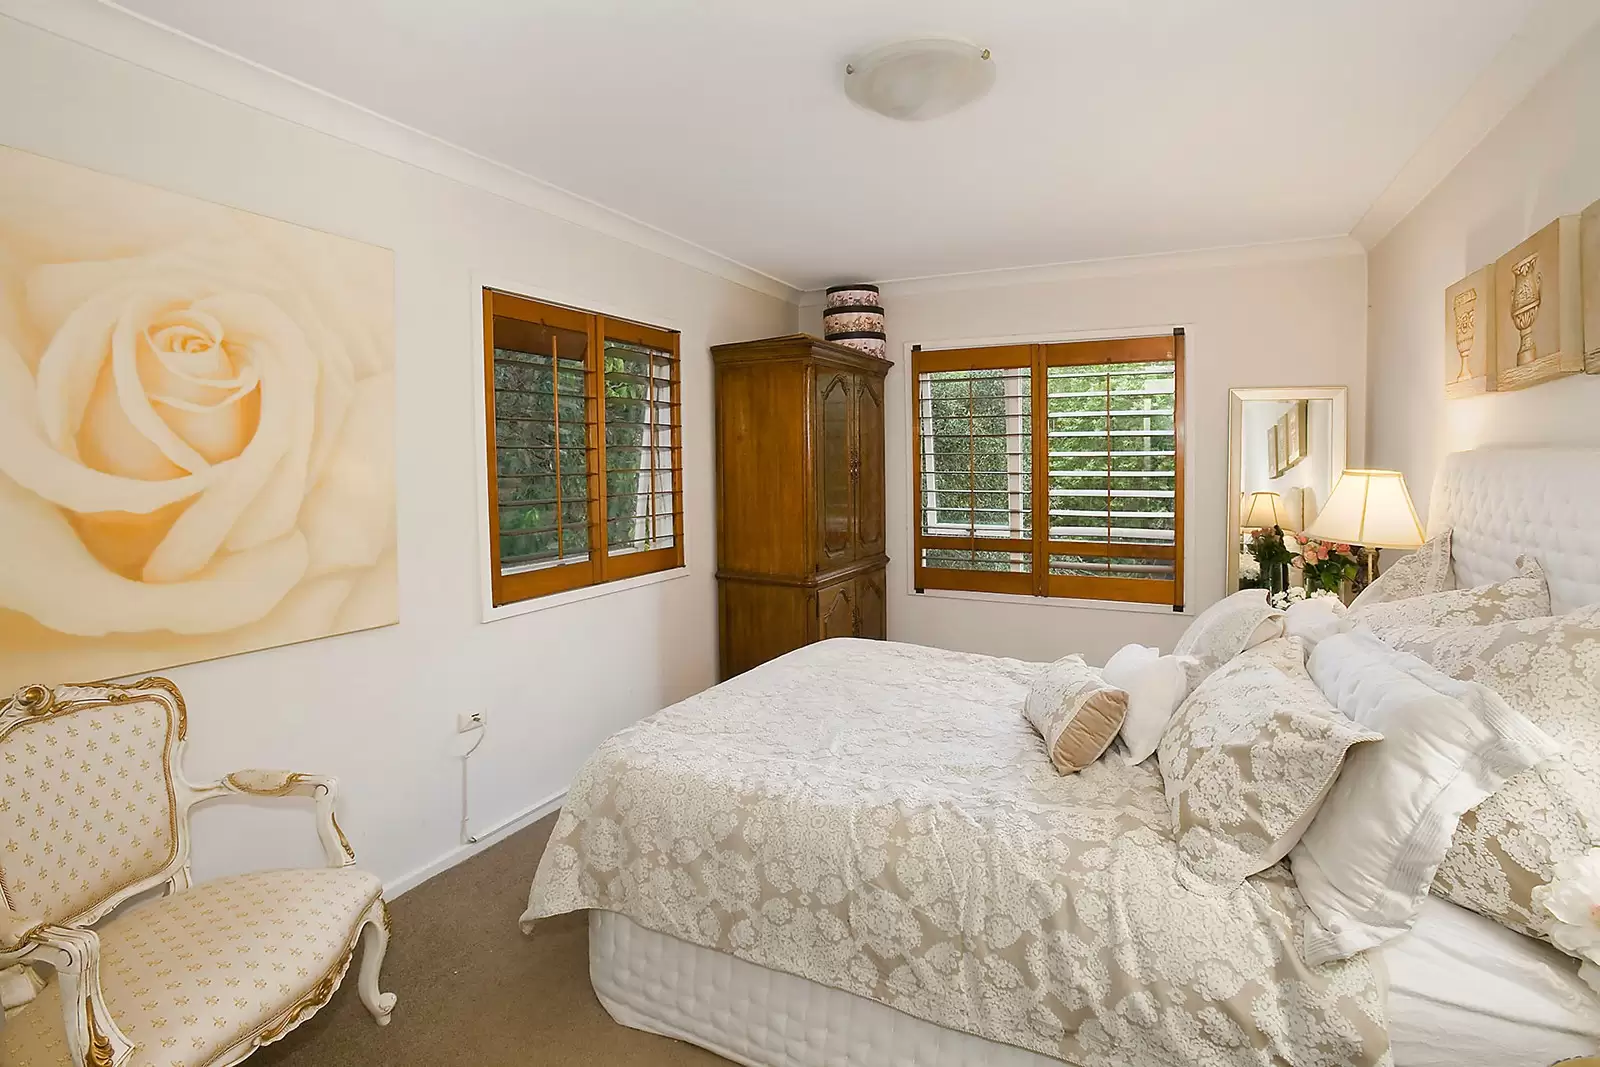 Photo #6: 22/14 Leura Road, Double Bay - Leased by Sydney Sotheby's International Realty